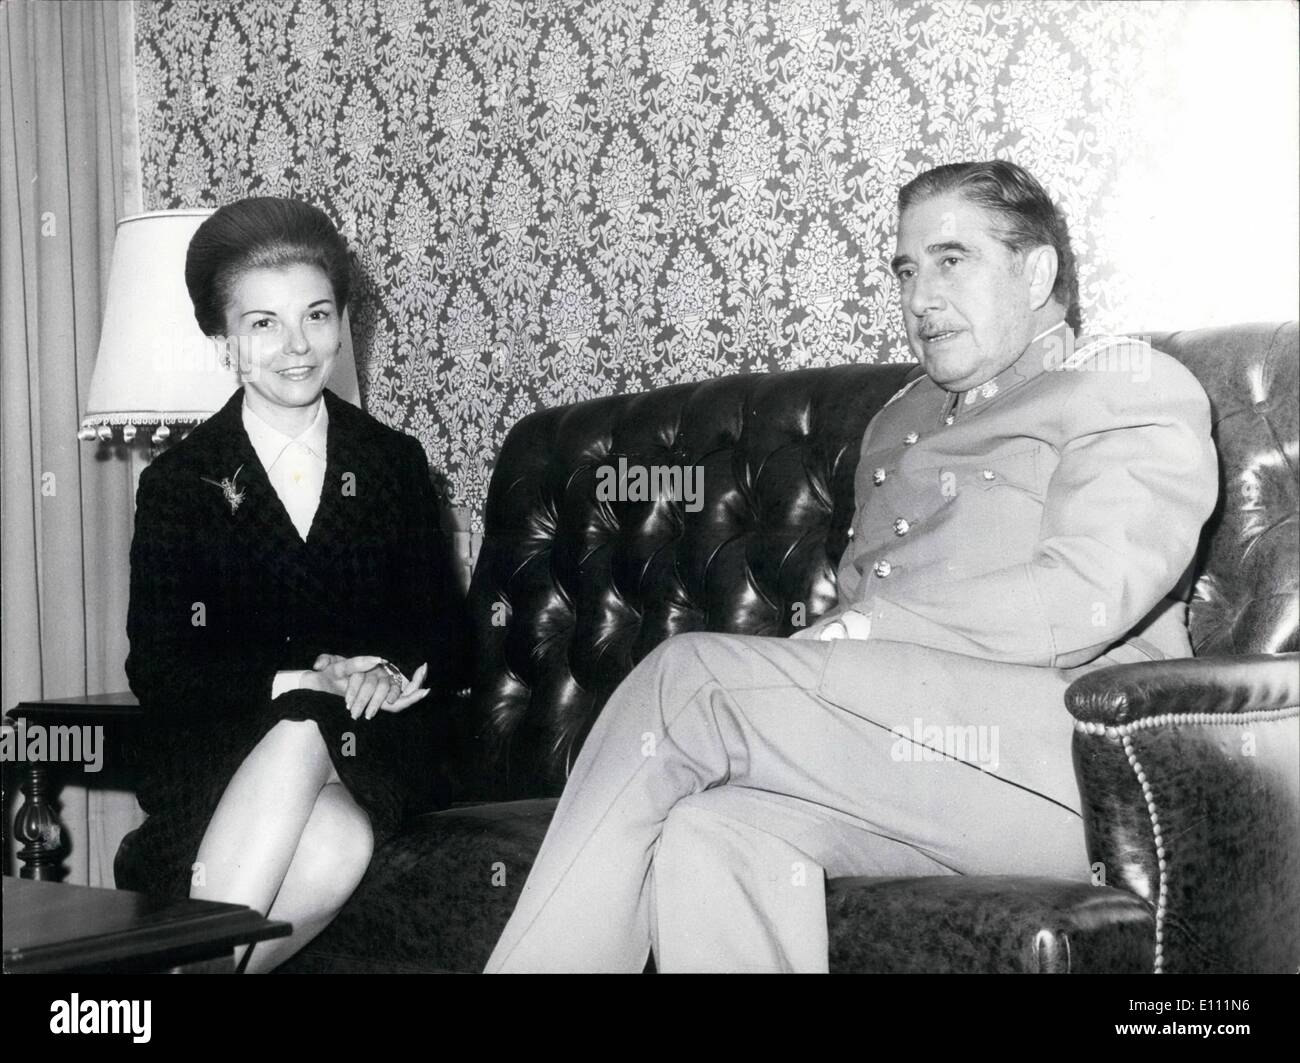 Apr. 04, 1975 - President Pinochet of Chile visits Mrs. Peron: General Augusto Pinochet Ugarte President of Chile paid an official visit to Mrs. Peron during his short stay of seven hours in the Argentine capital. During their negotiations at which the two Foreign Ministers also attended, they discussed questions of sovereignity in the Antarctic, formation of bi-national enterprises for public works of mutual interest, and to confirm the opposition of both nations to foreign intervention and foreign doctrines and majorities of both countries reject Stock Photo